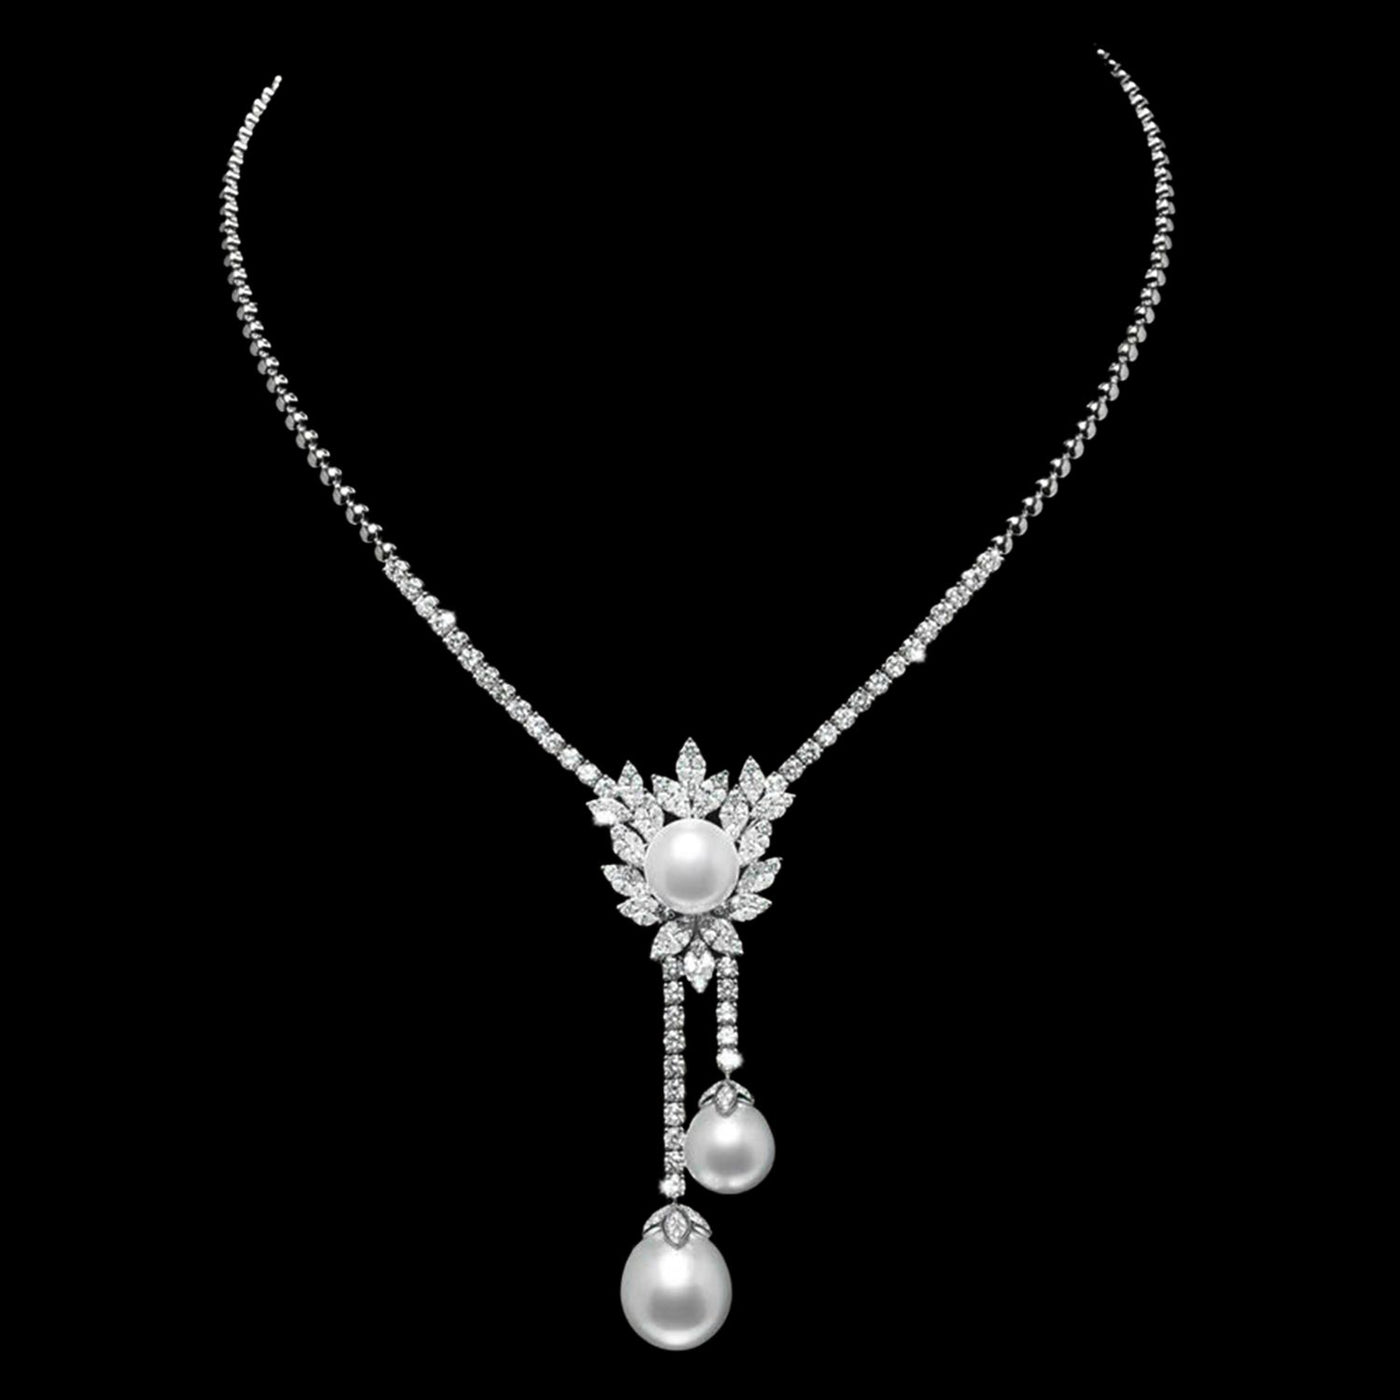 Susanne Pearl and Diamond Necklace